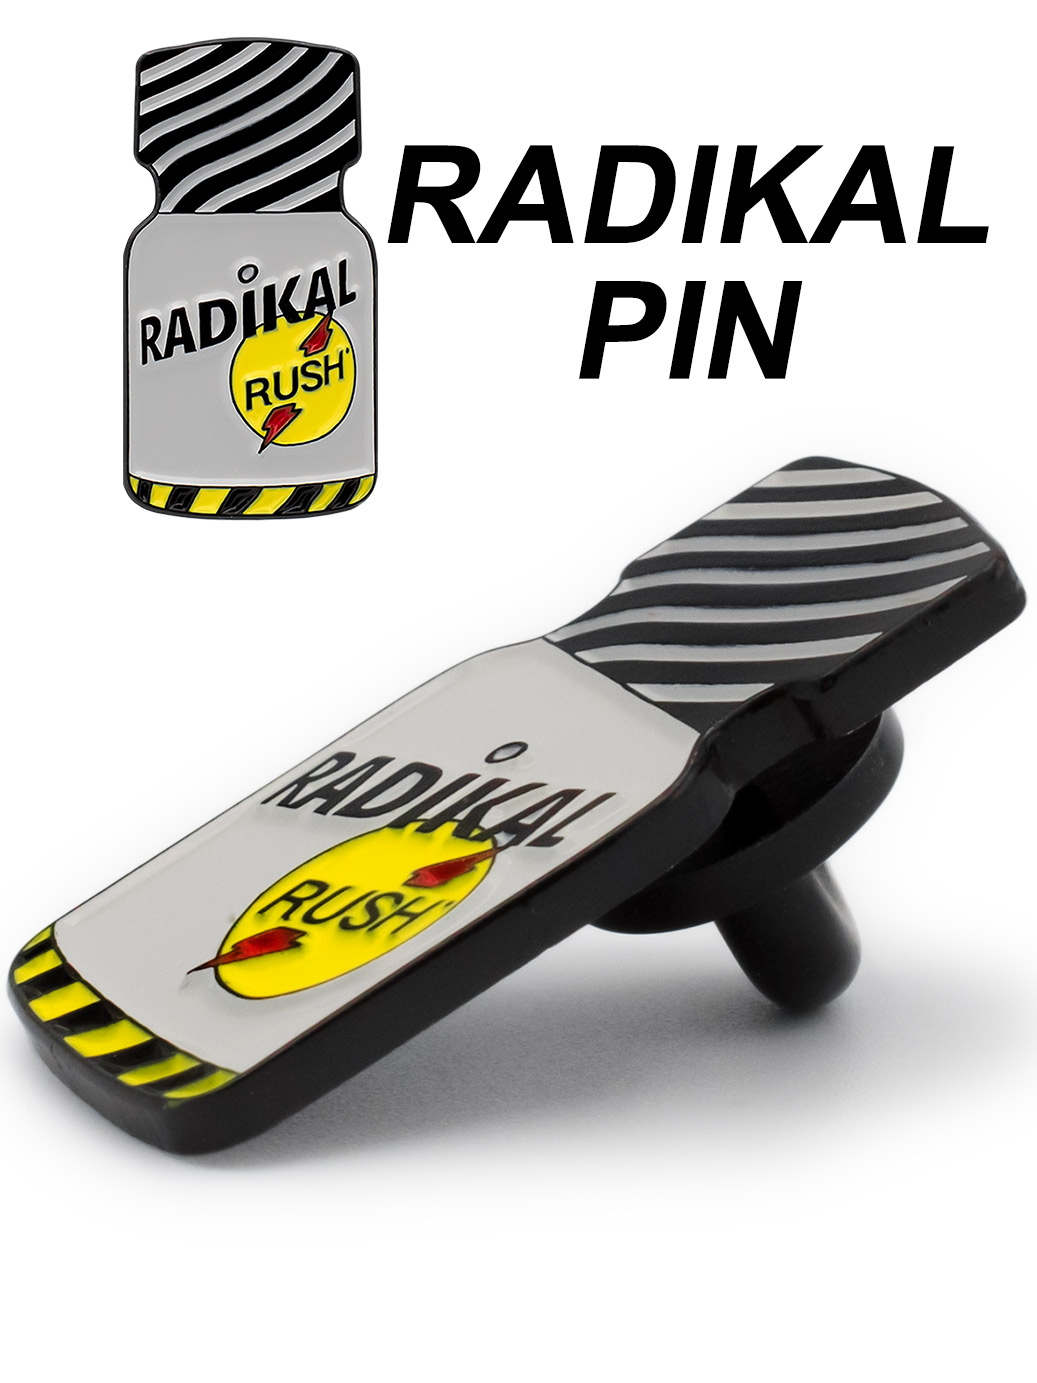 https://www.poppers.be/shop/images/product_images/popup_images/poppers-pin-radikal-rush.jpg